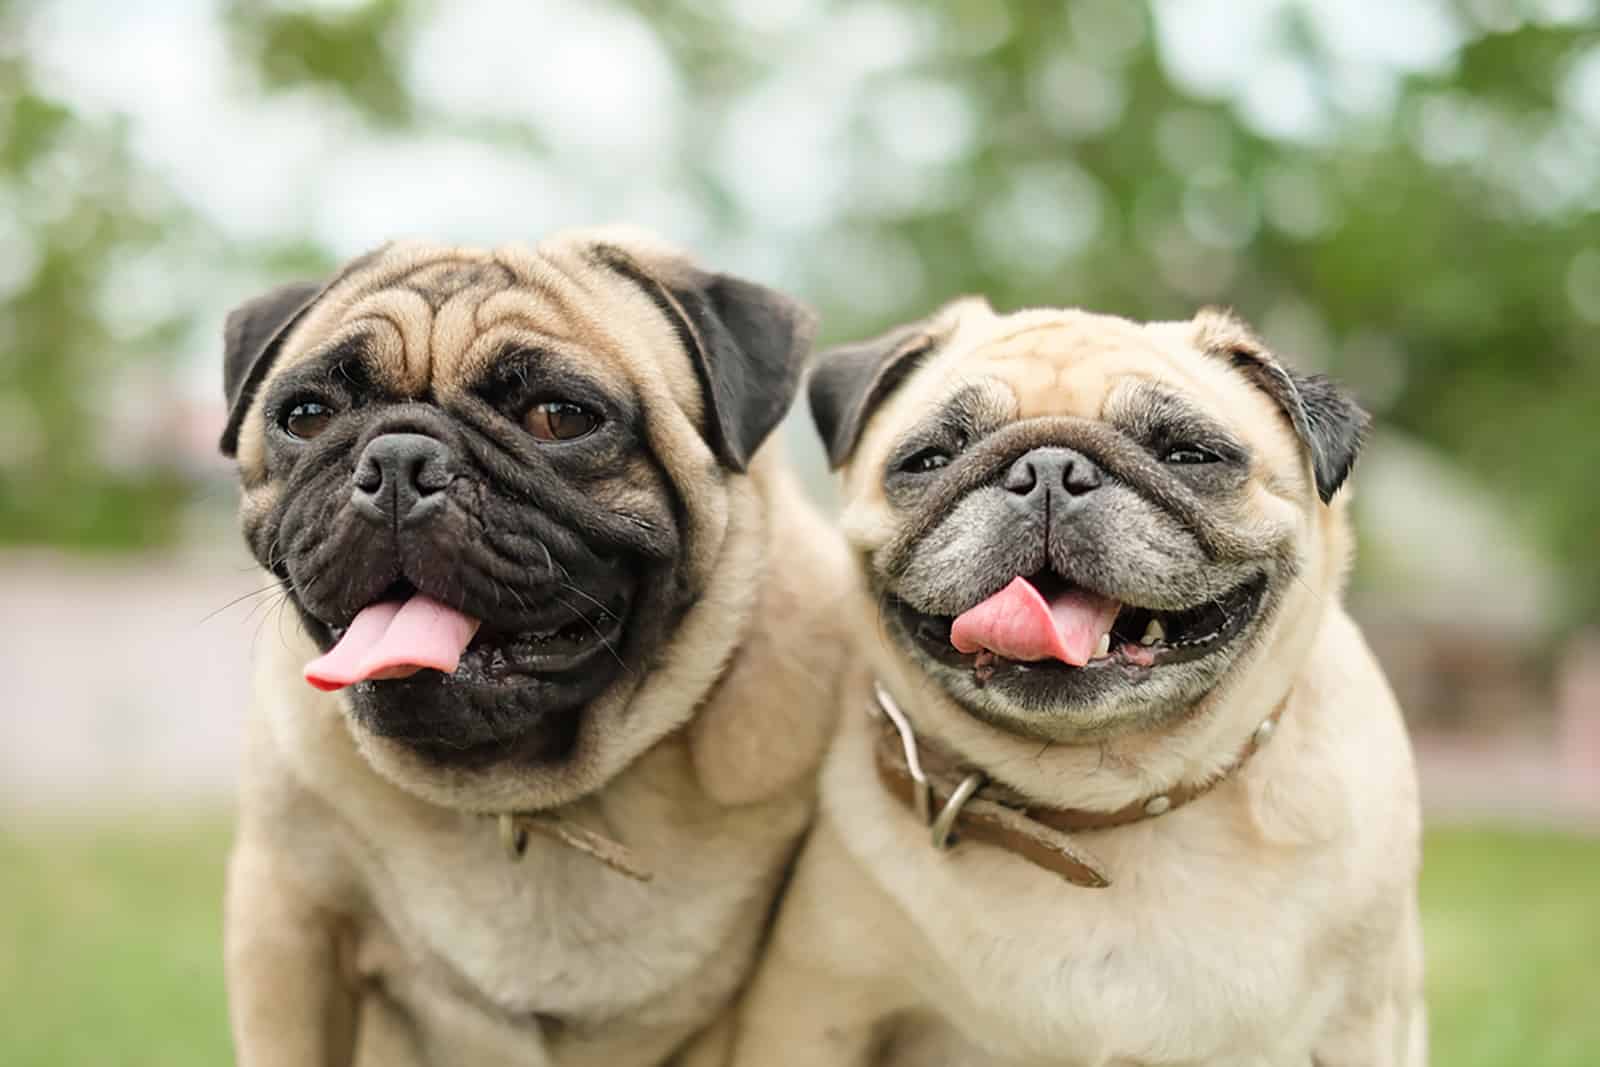 the male and female pugs dog sitting together in the garden